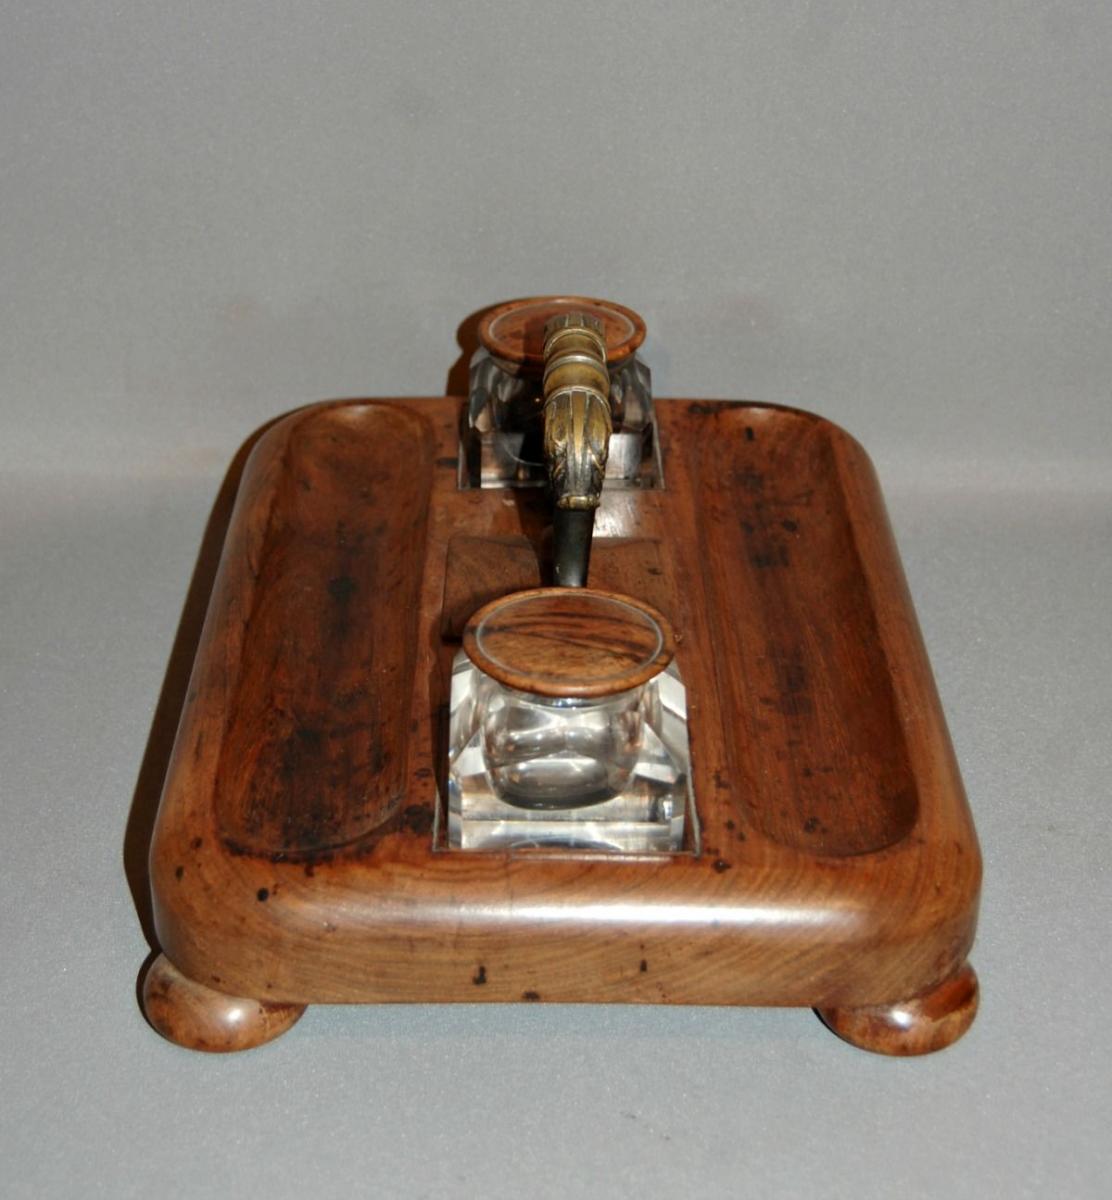 Rosewood Inkwell, 19th century